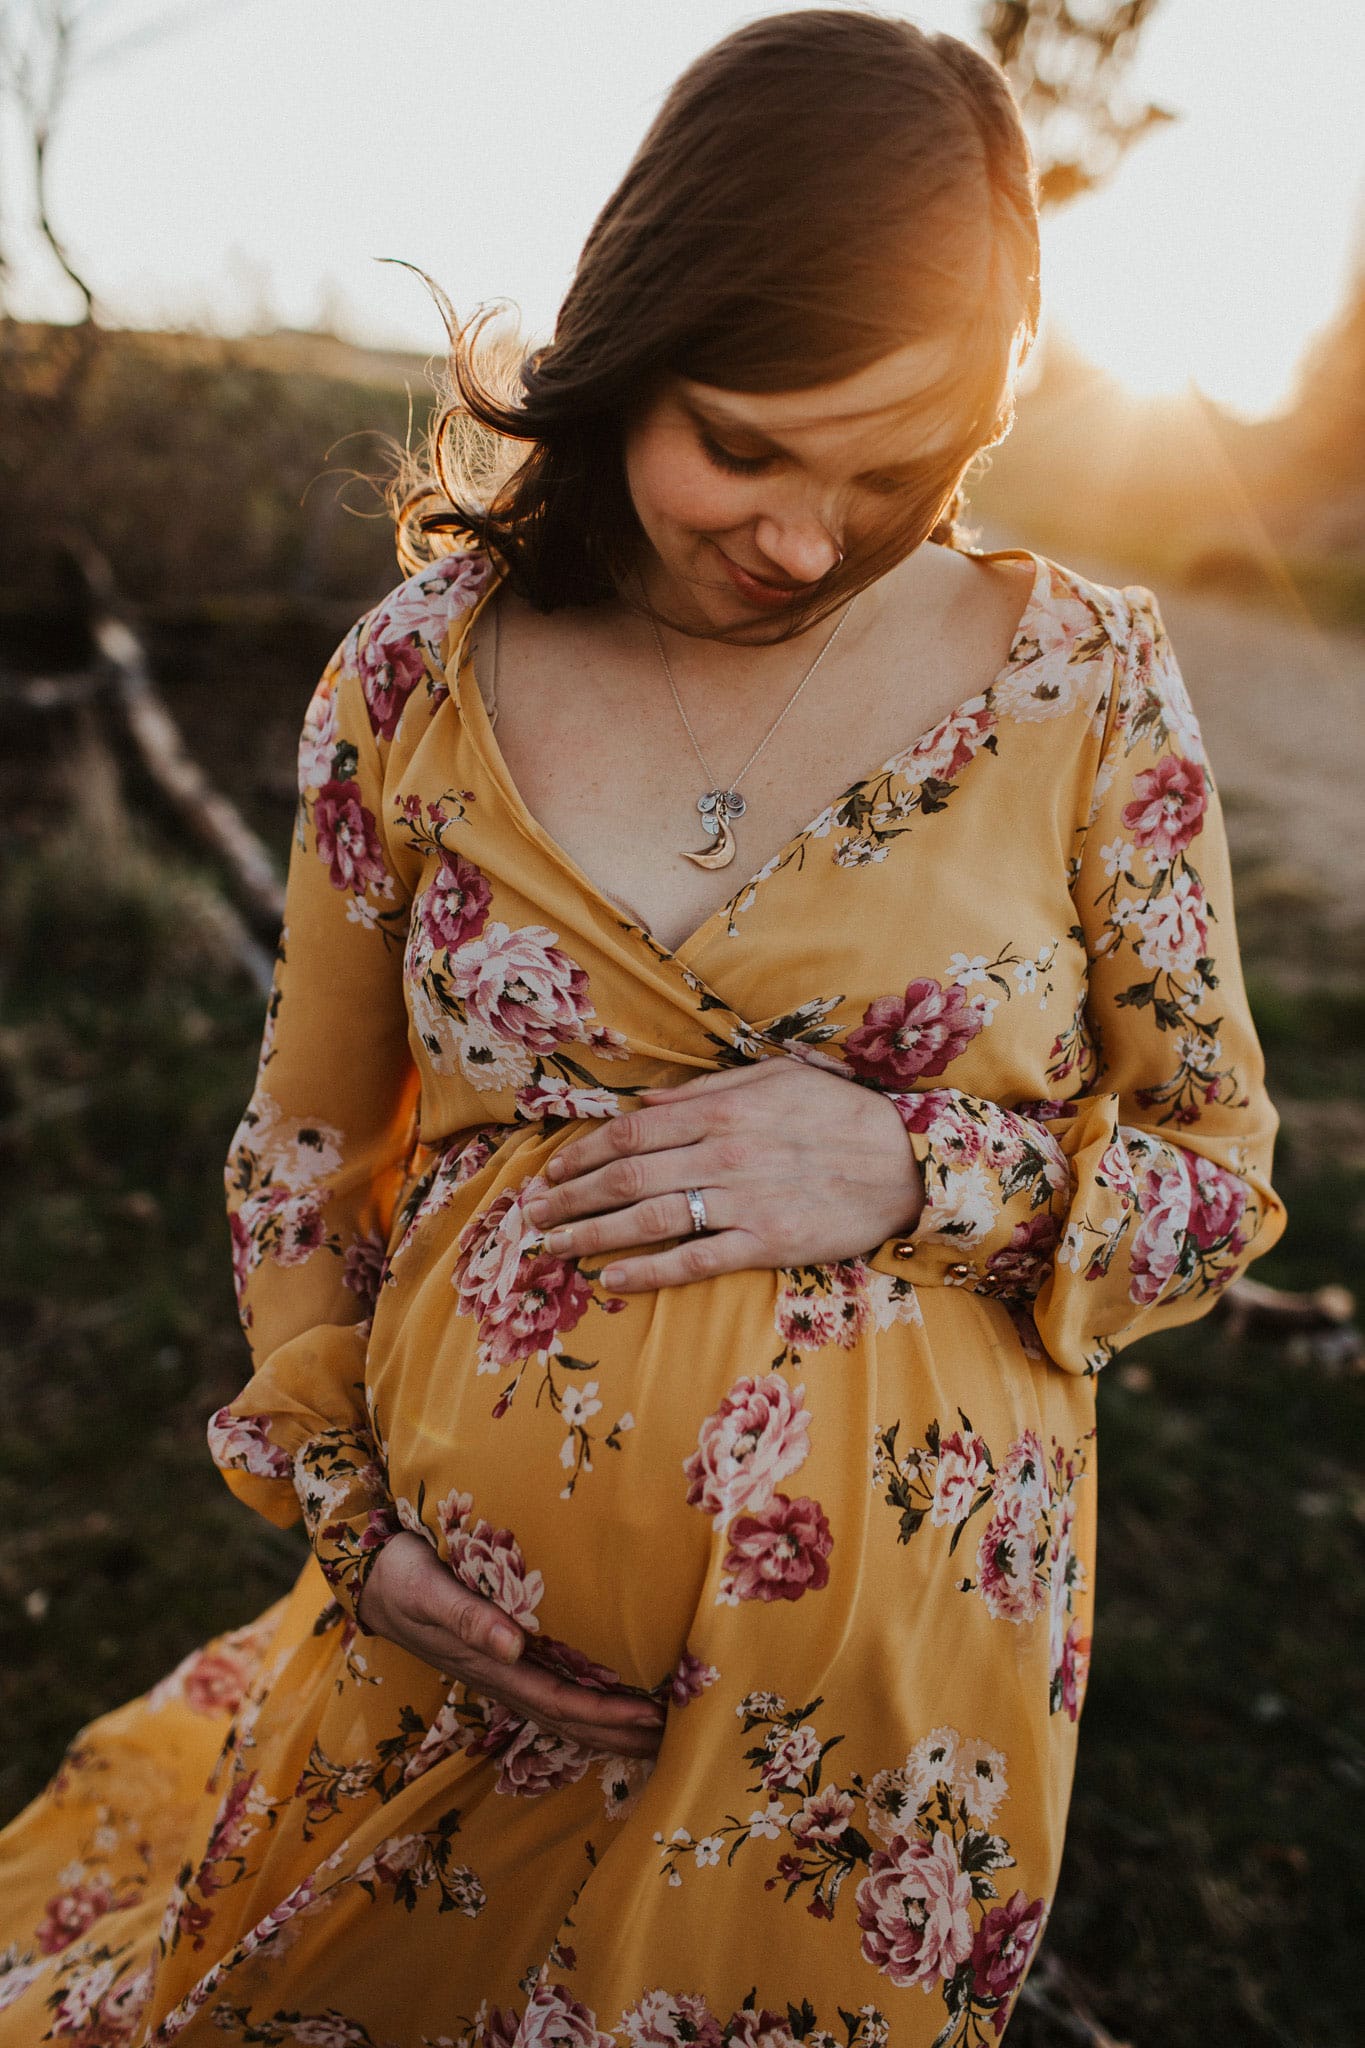 Lifestyle Maternity Family Photography of a Gorgeous Mother in a Mustard Floral Dress